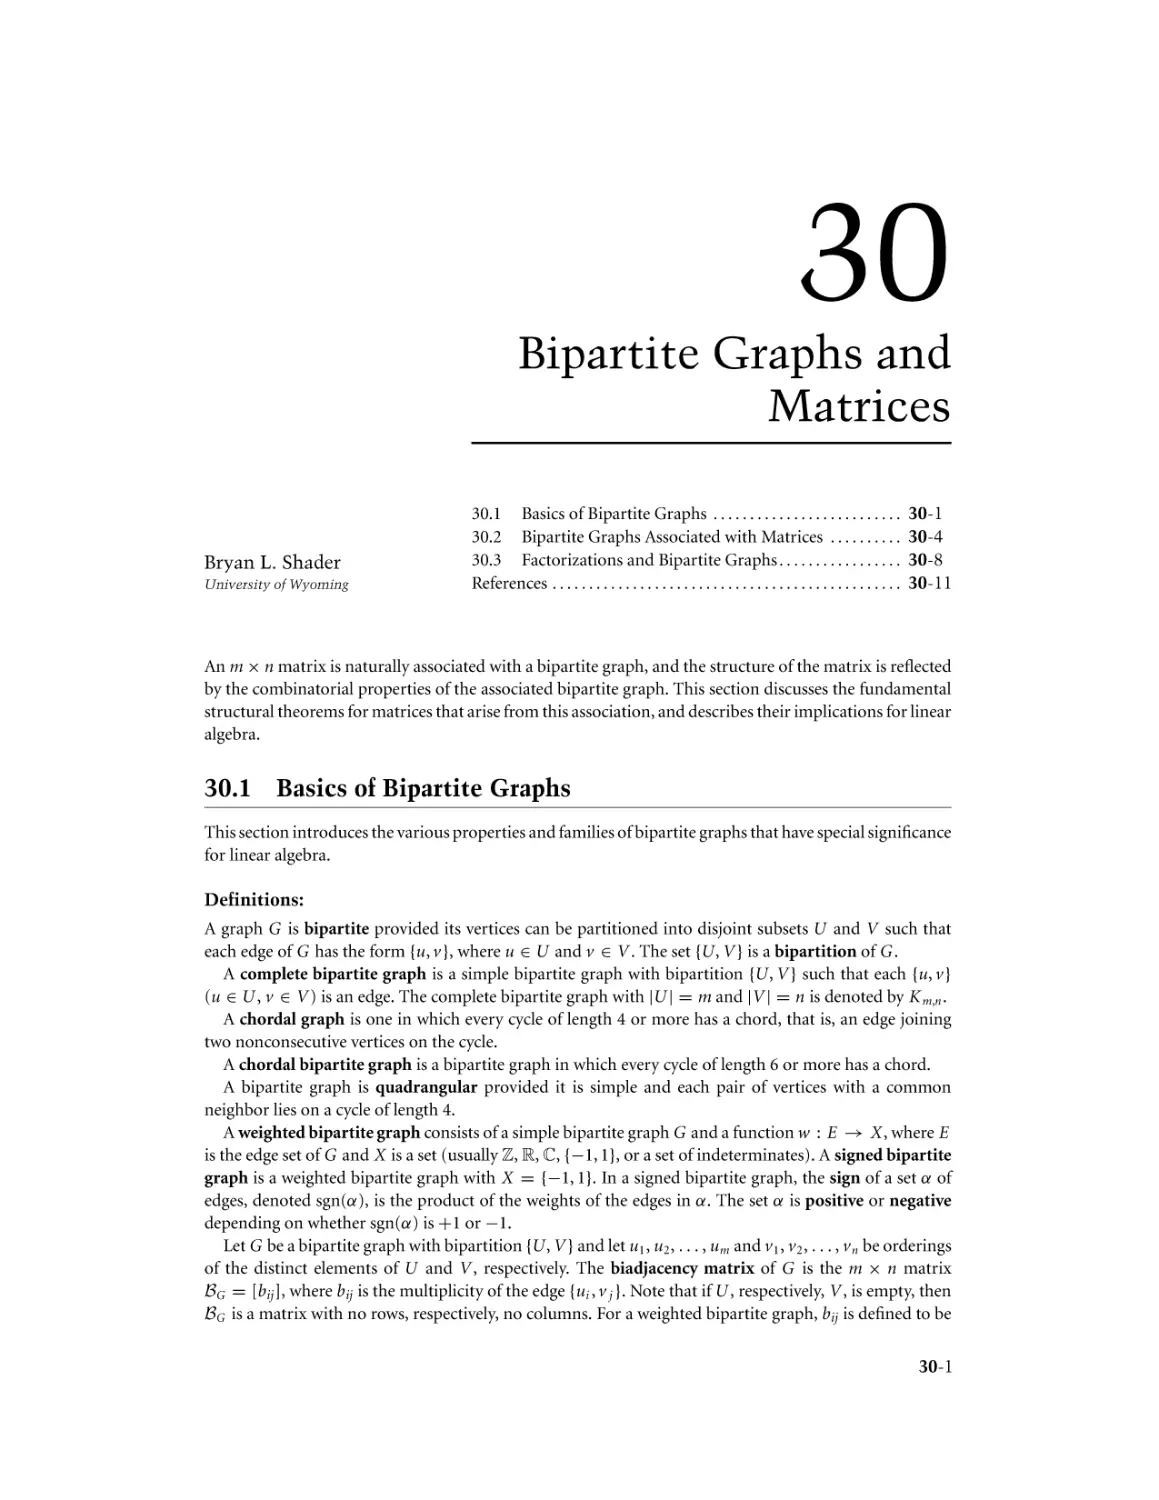 Chapter 30. Bipartite Graphs and Matrices